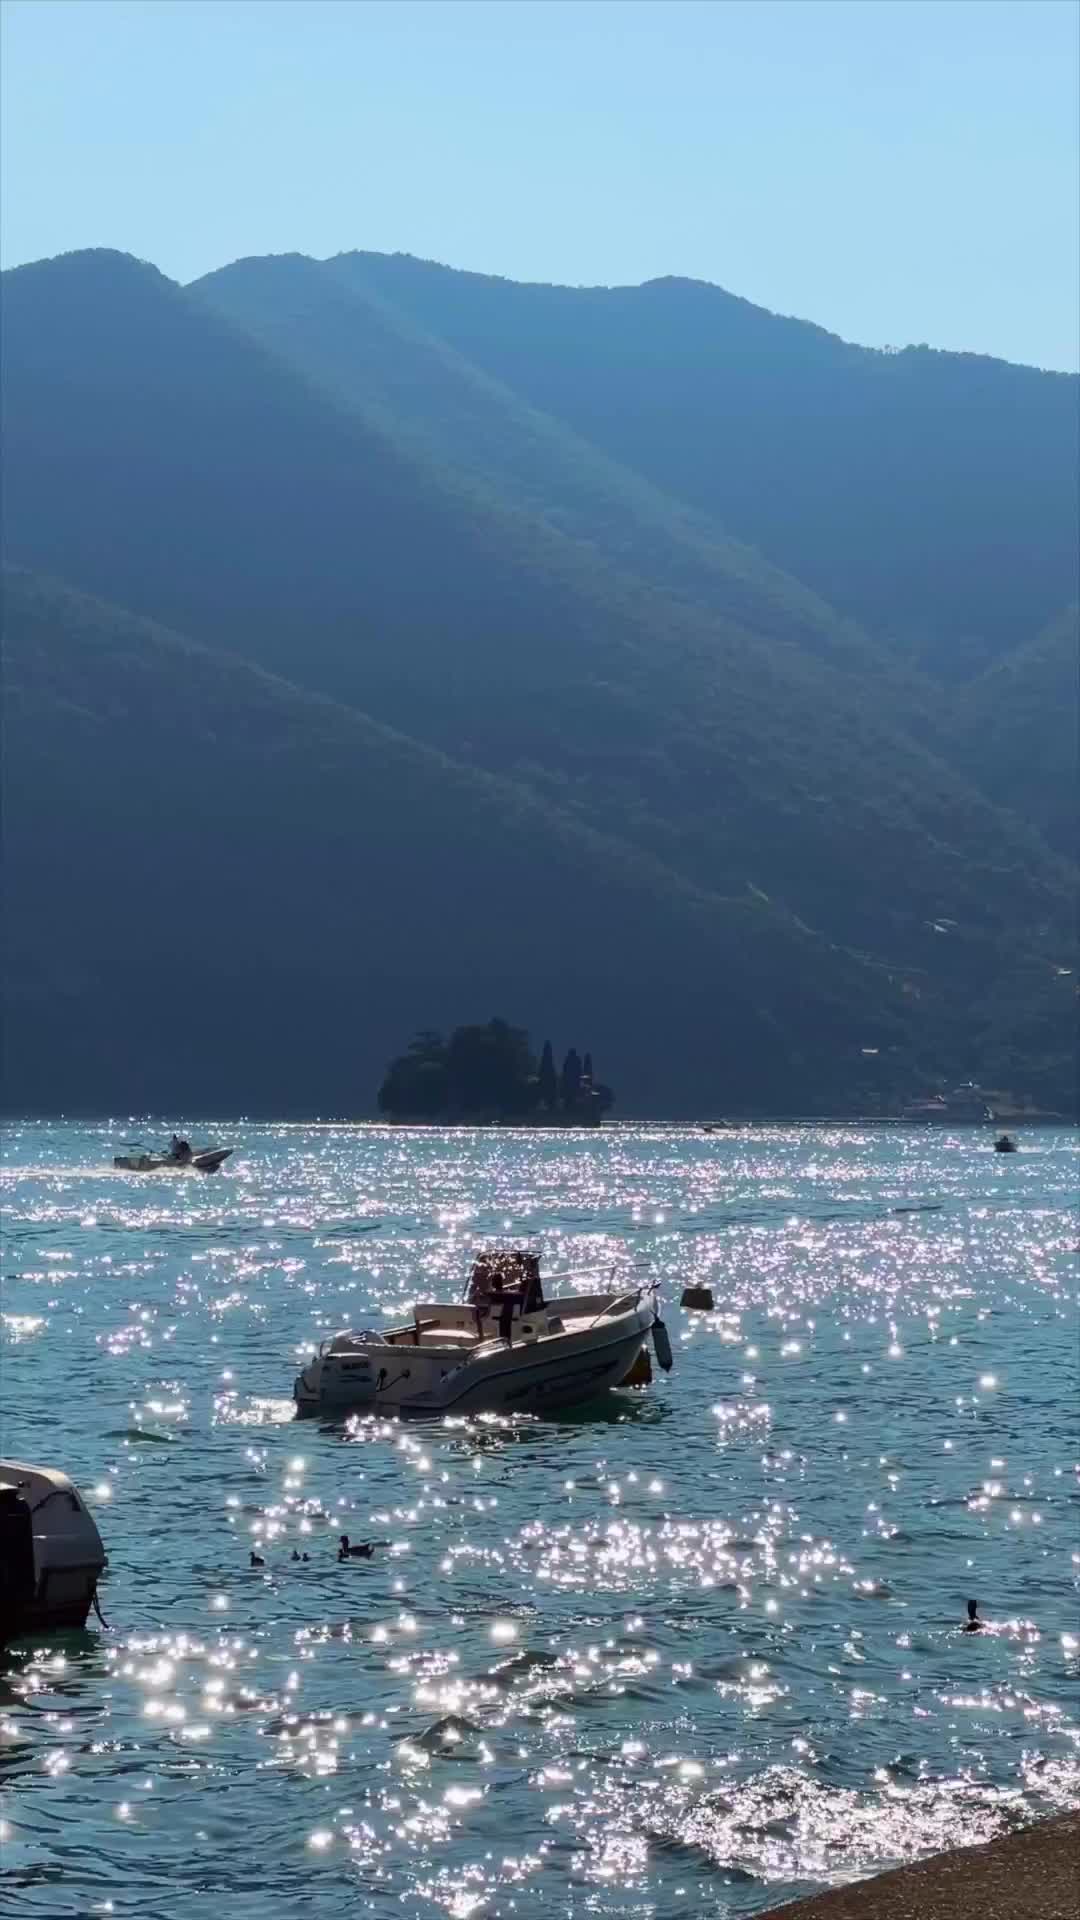 Slow Life at Lake Iseo, Italy - A Scenic Escape